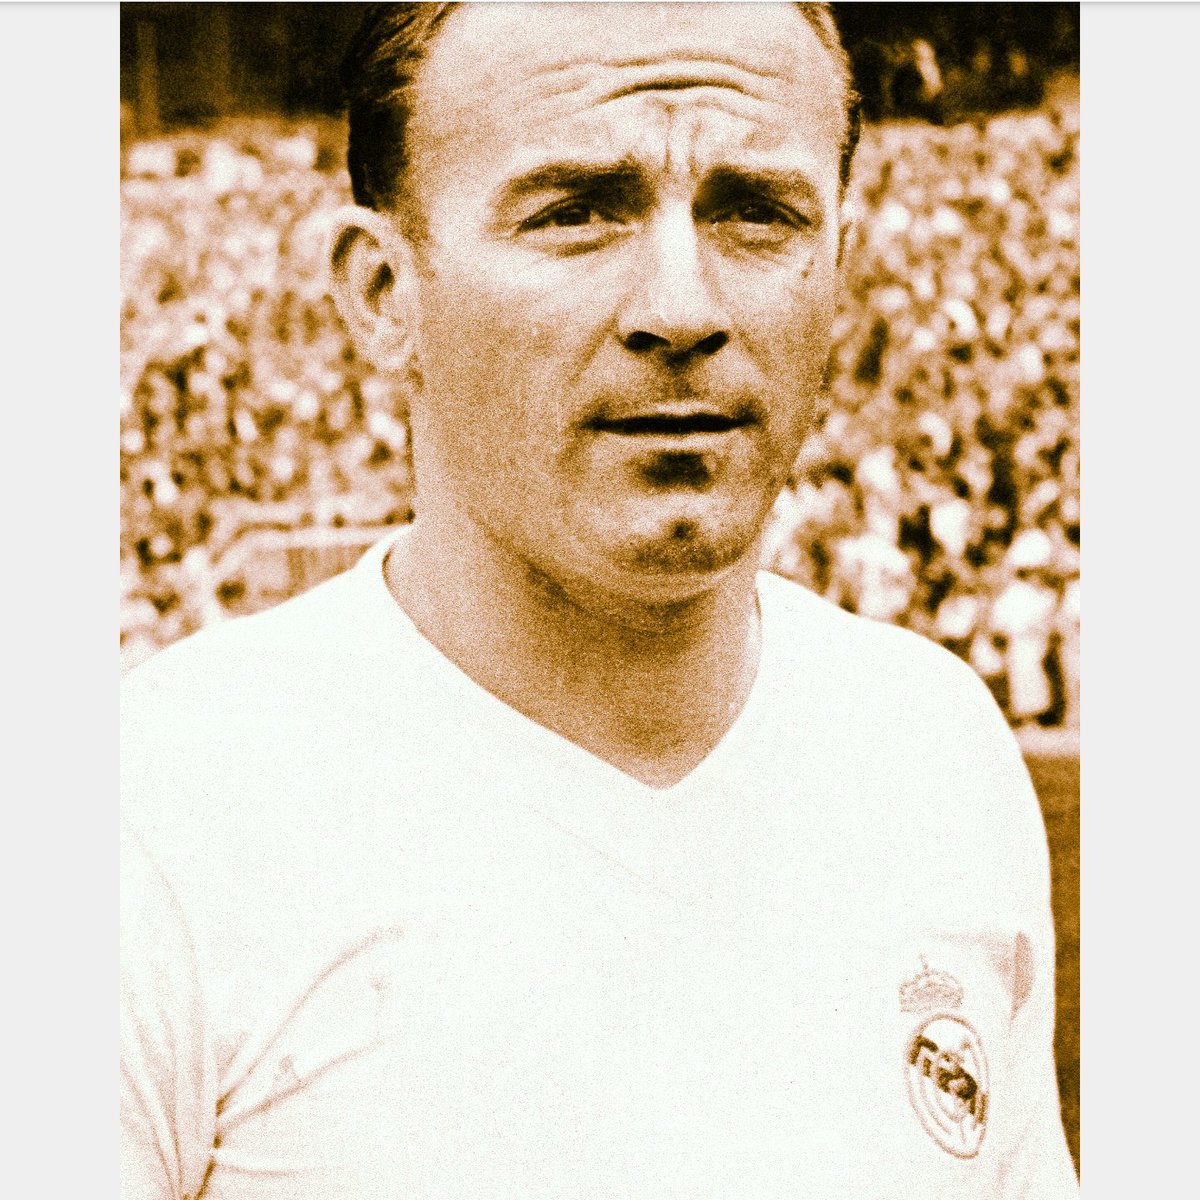 AWAITED THREADAlfredo Di Stefano's controversial transfer to Real Madrid. Was he initially supposed to sign for Barcelona?Did Spanish dictator, General Franco, intervene and force the Argentine to sign for his 'regime club', Real Madrid?